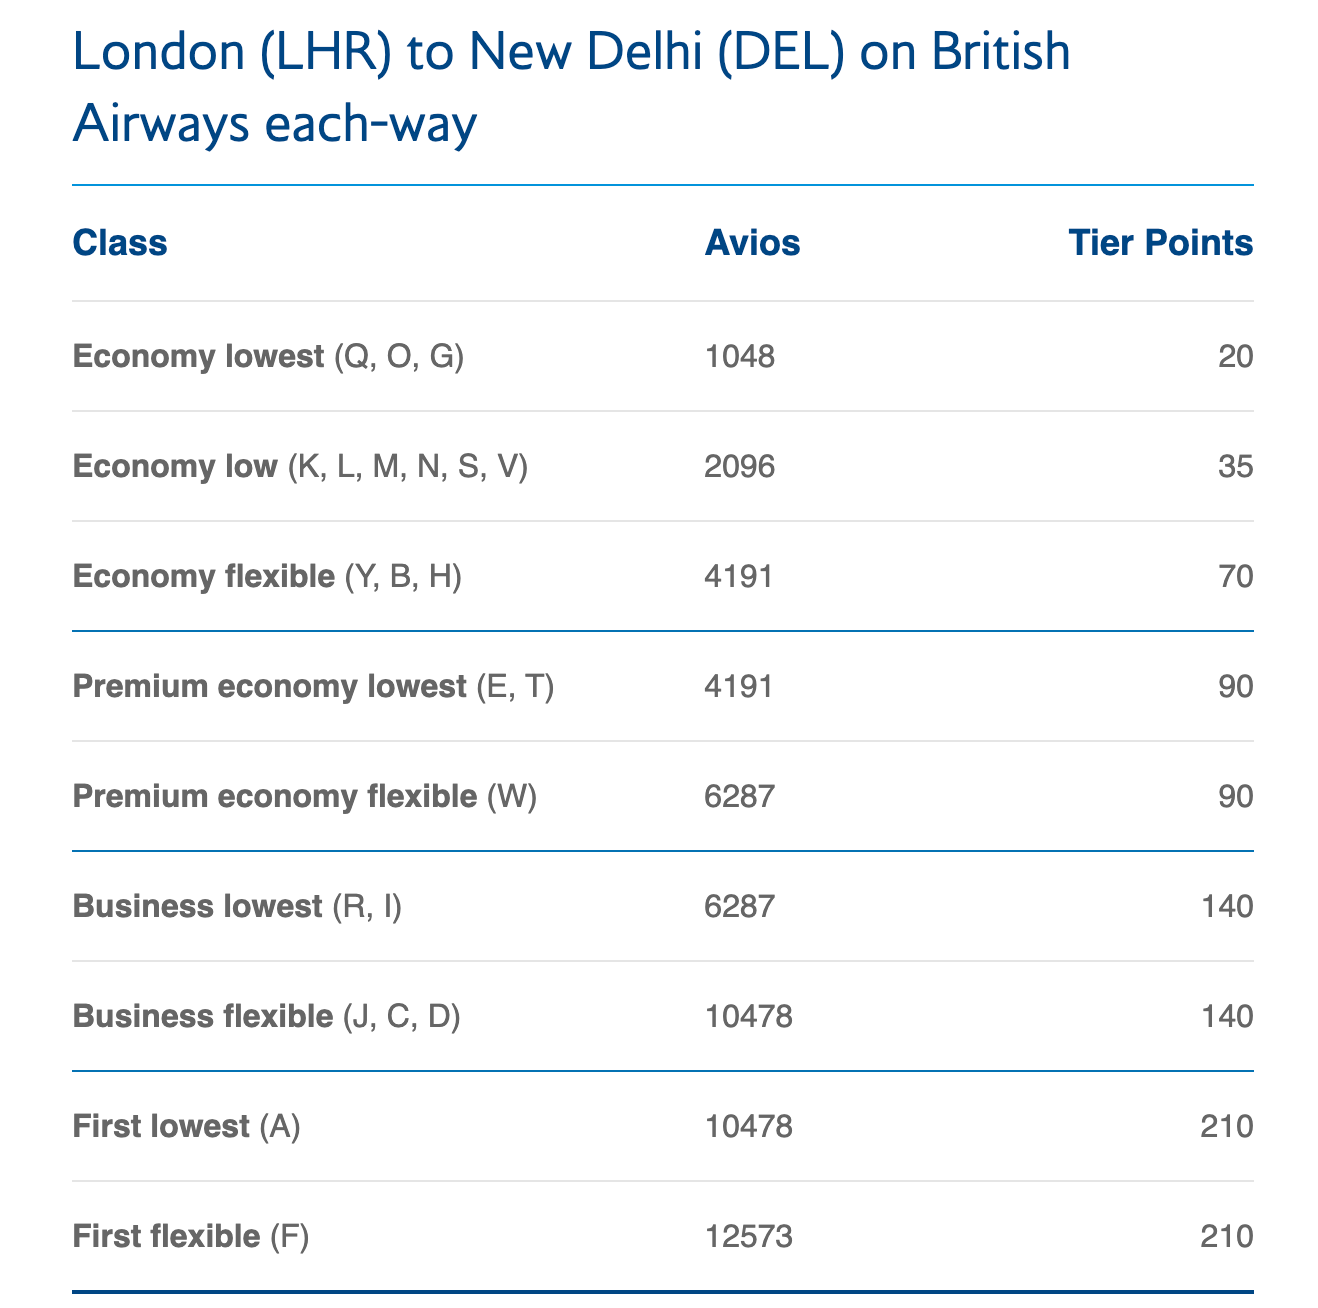 A table showing the earnings for a British Airways flight from London to New Delhi.